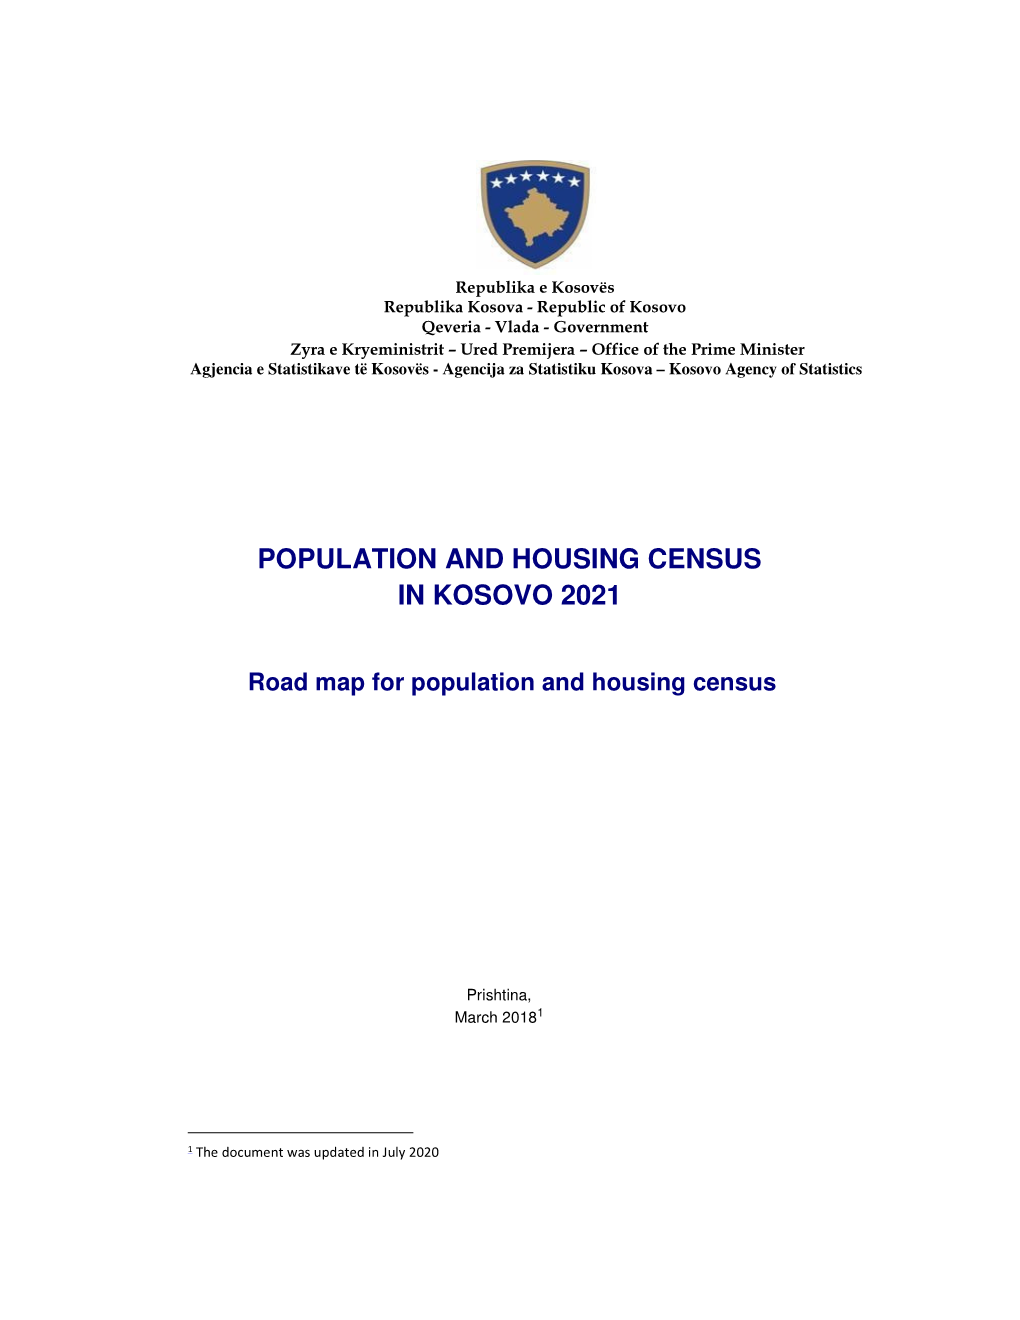 Population and Housing Census in Kosovo 2021